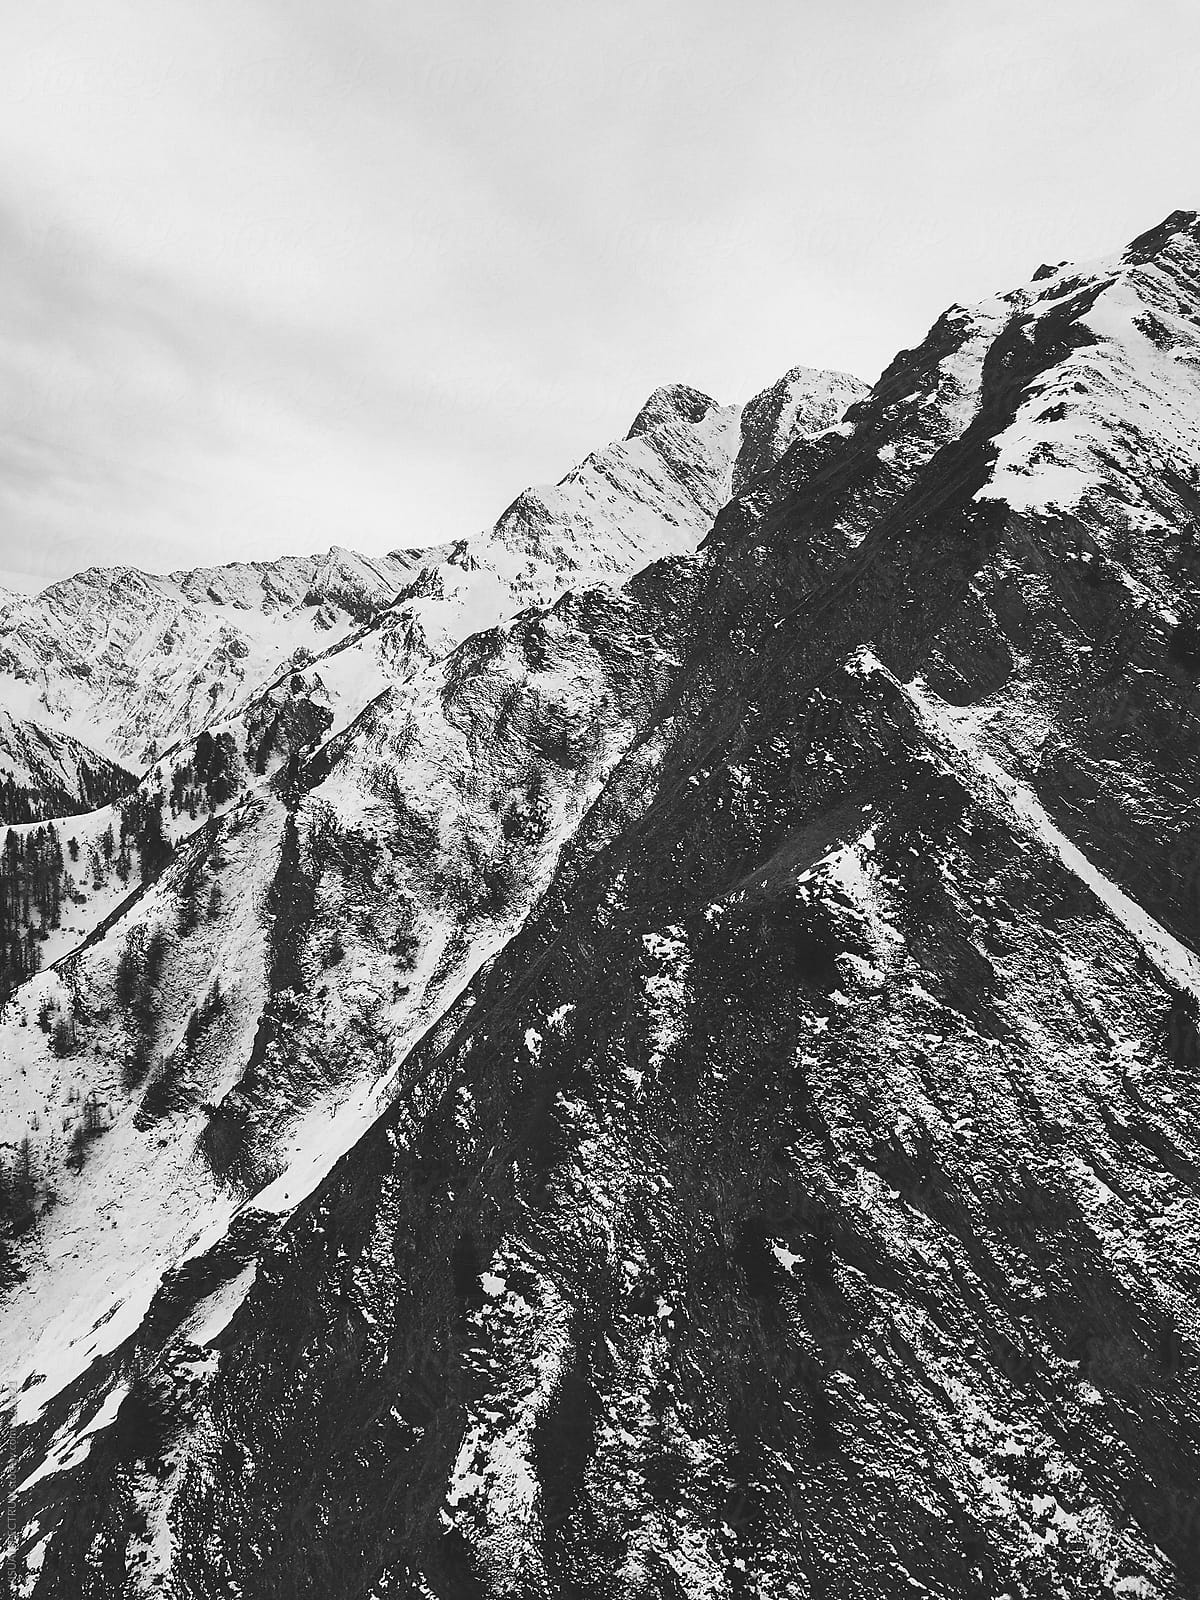 Mountains of Switzerland - Black and White Shot of Snow-Covered Alps